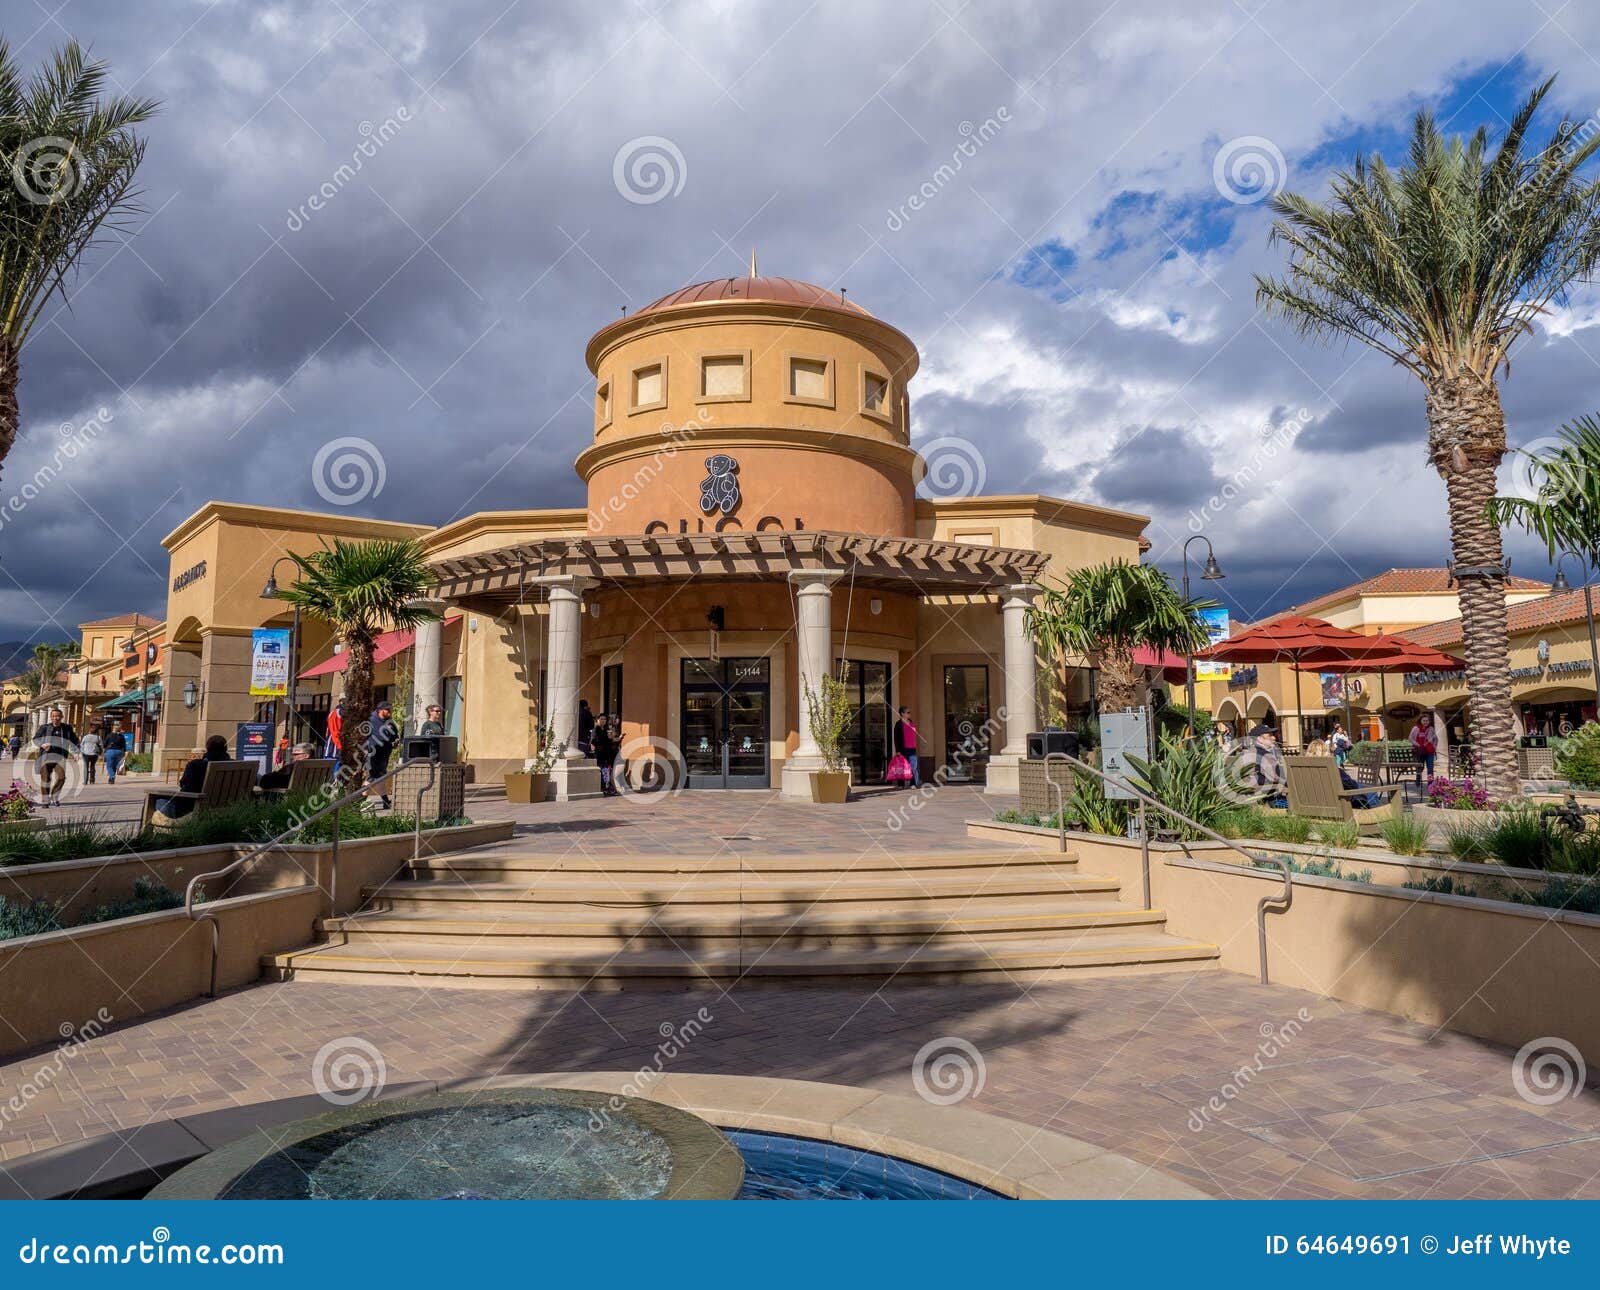 Desert Hills Premium Outlet Mall Editorial Photo - Image: 64649691